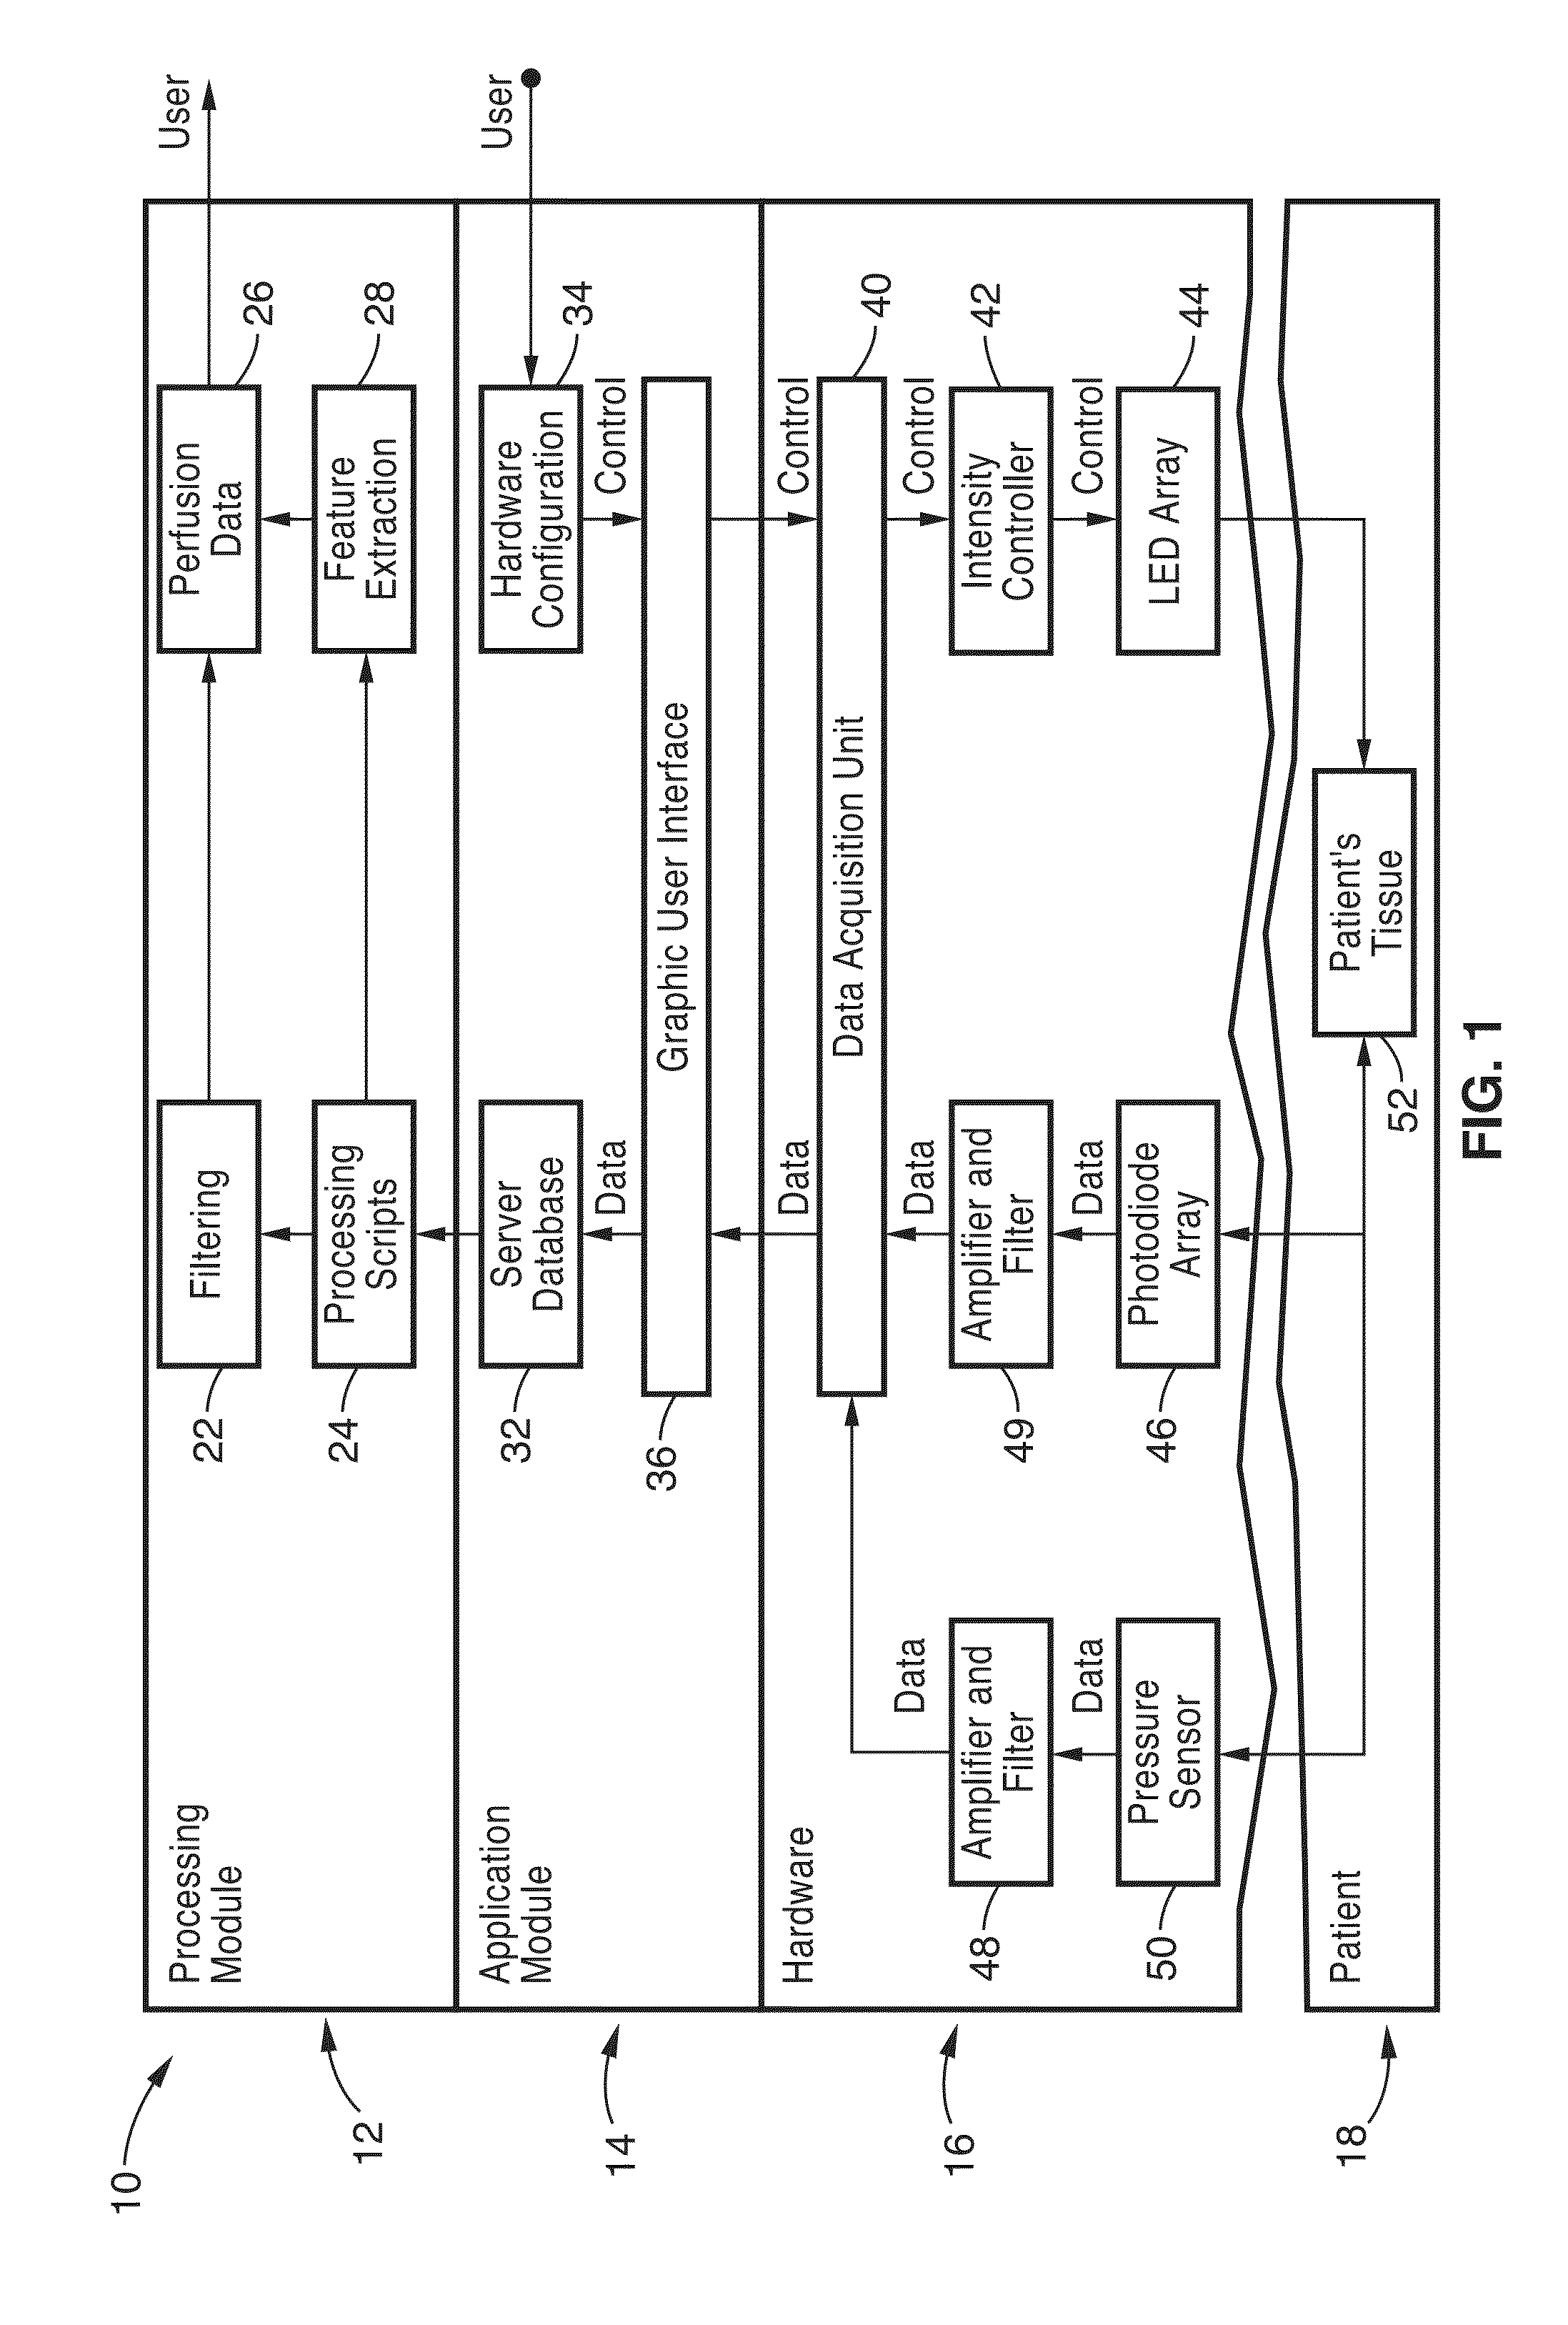 Apparatus, systems, and methods for tissue oximetry and perfusion imaging